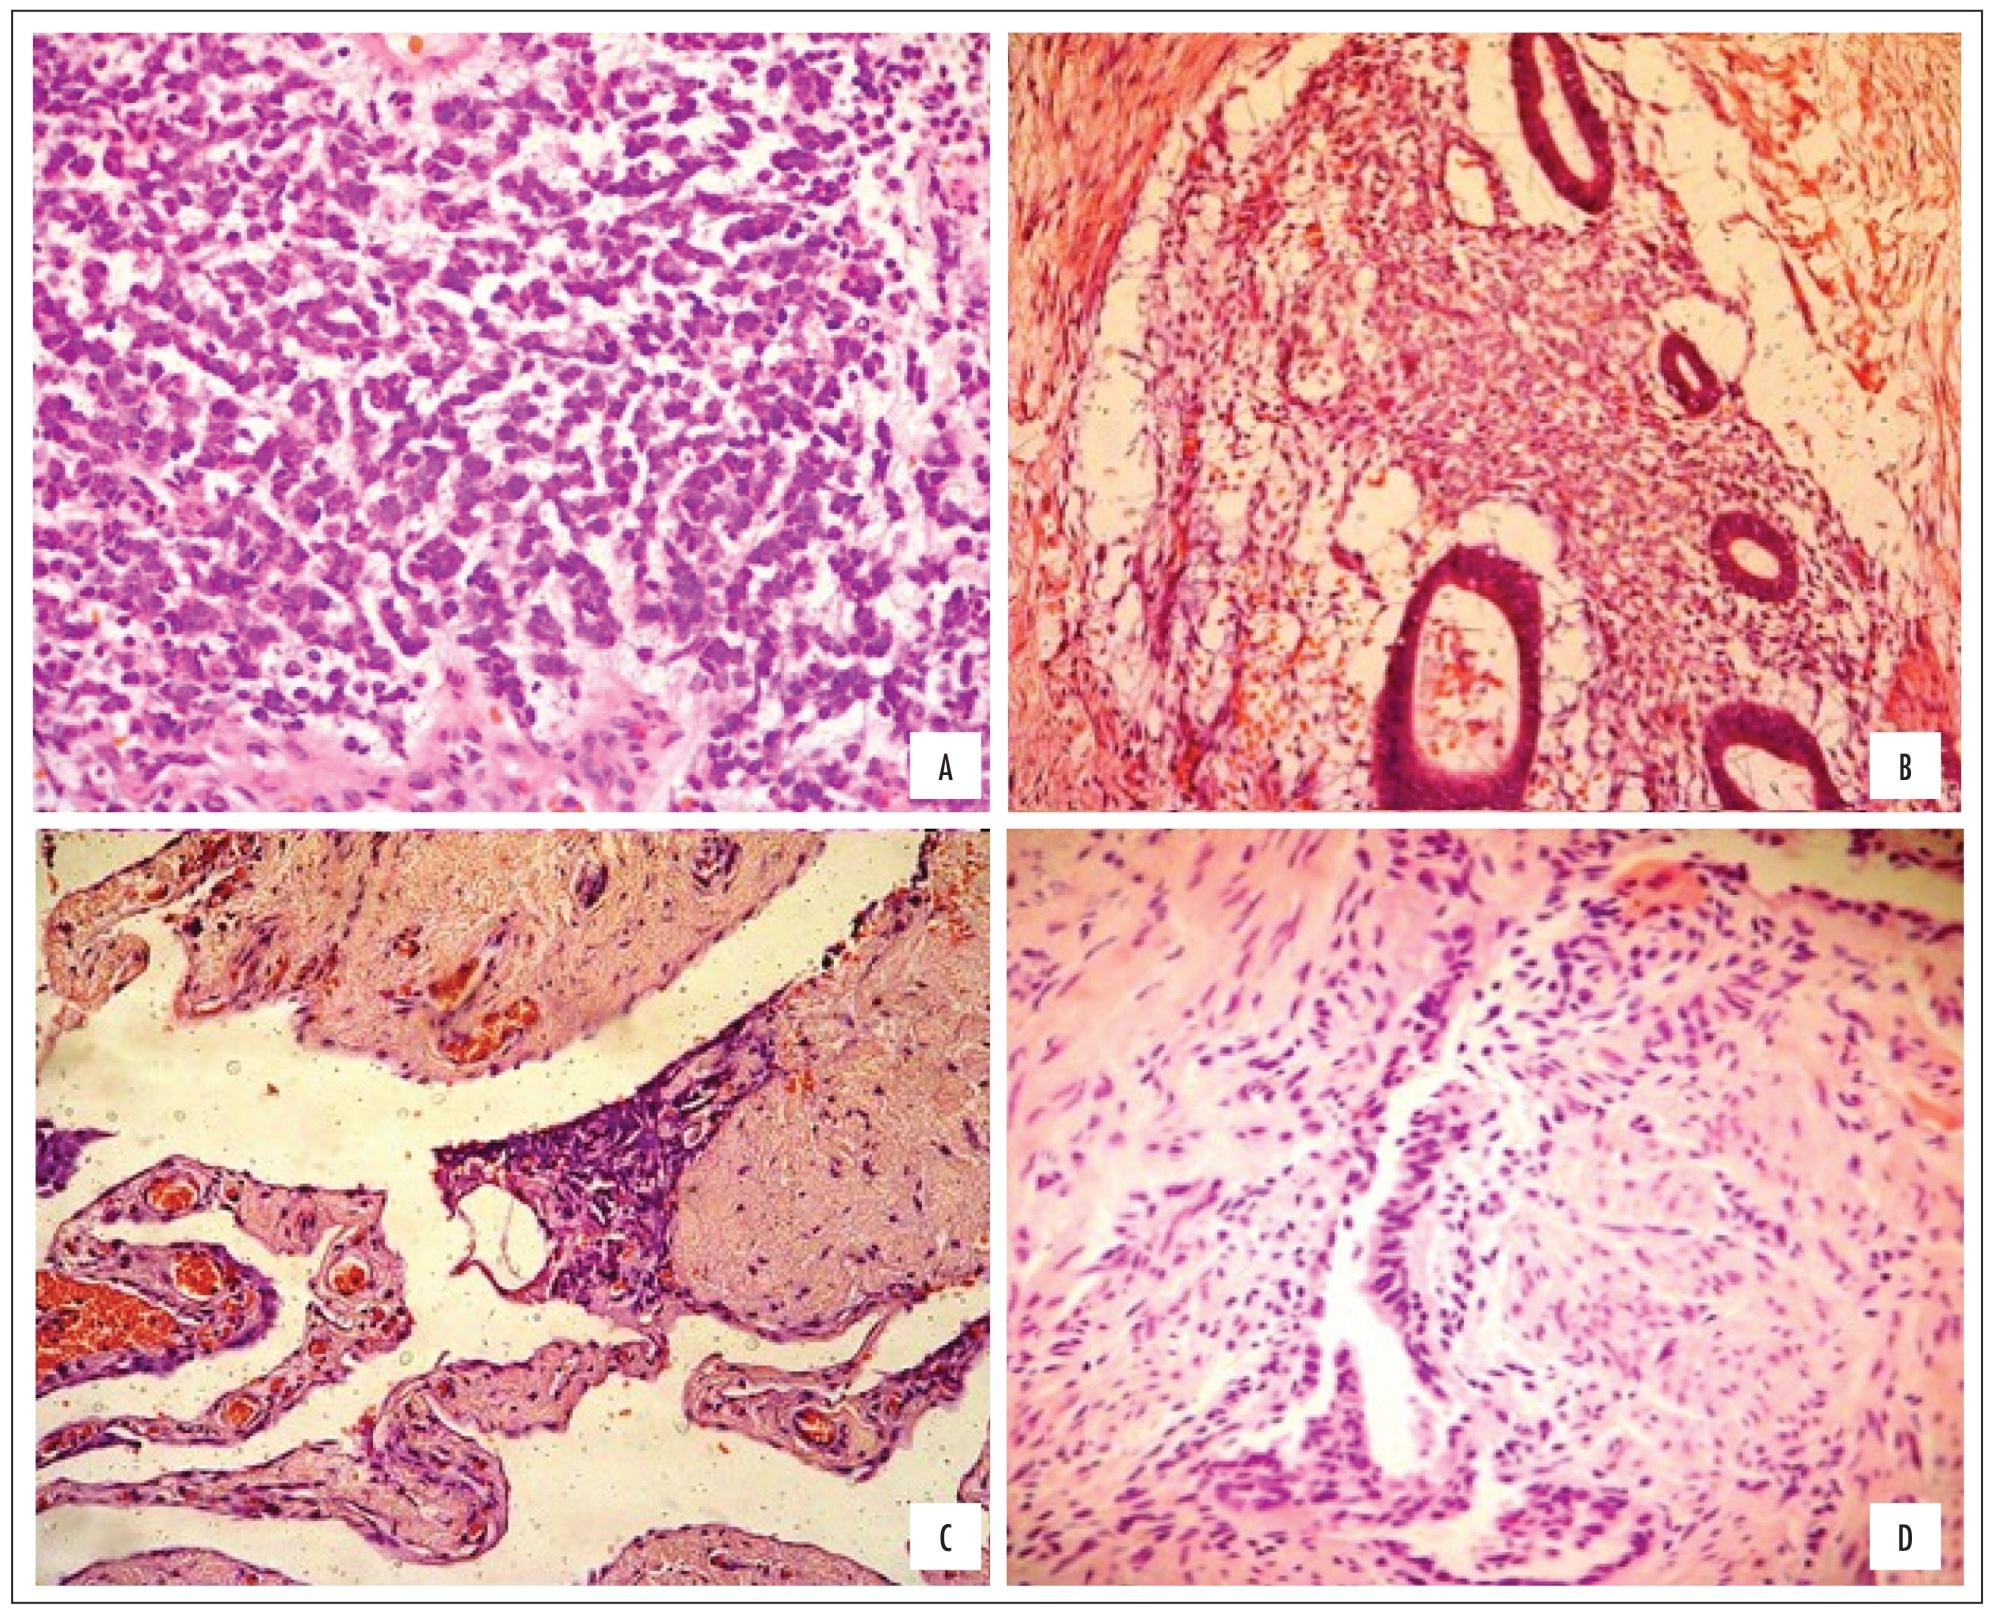 Histological classification and quality of life in women with endometriosis